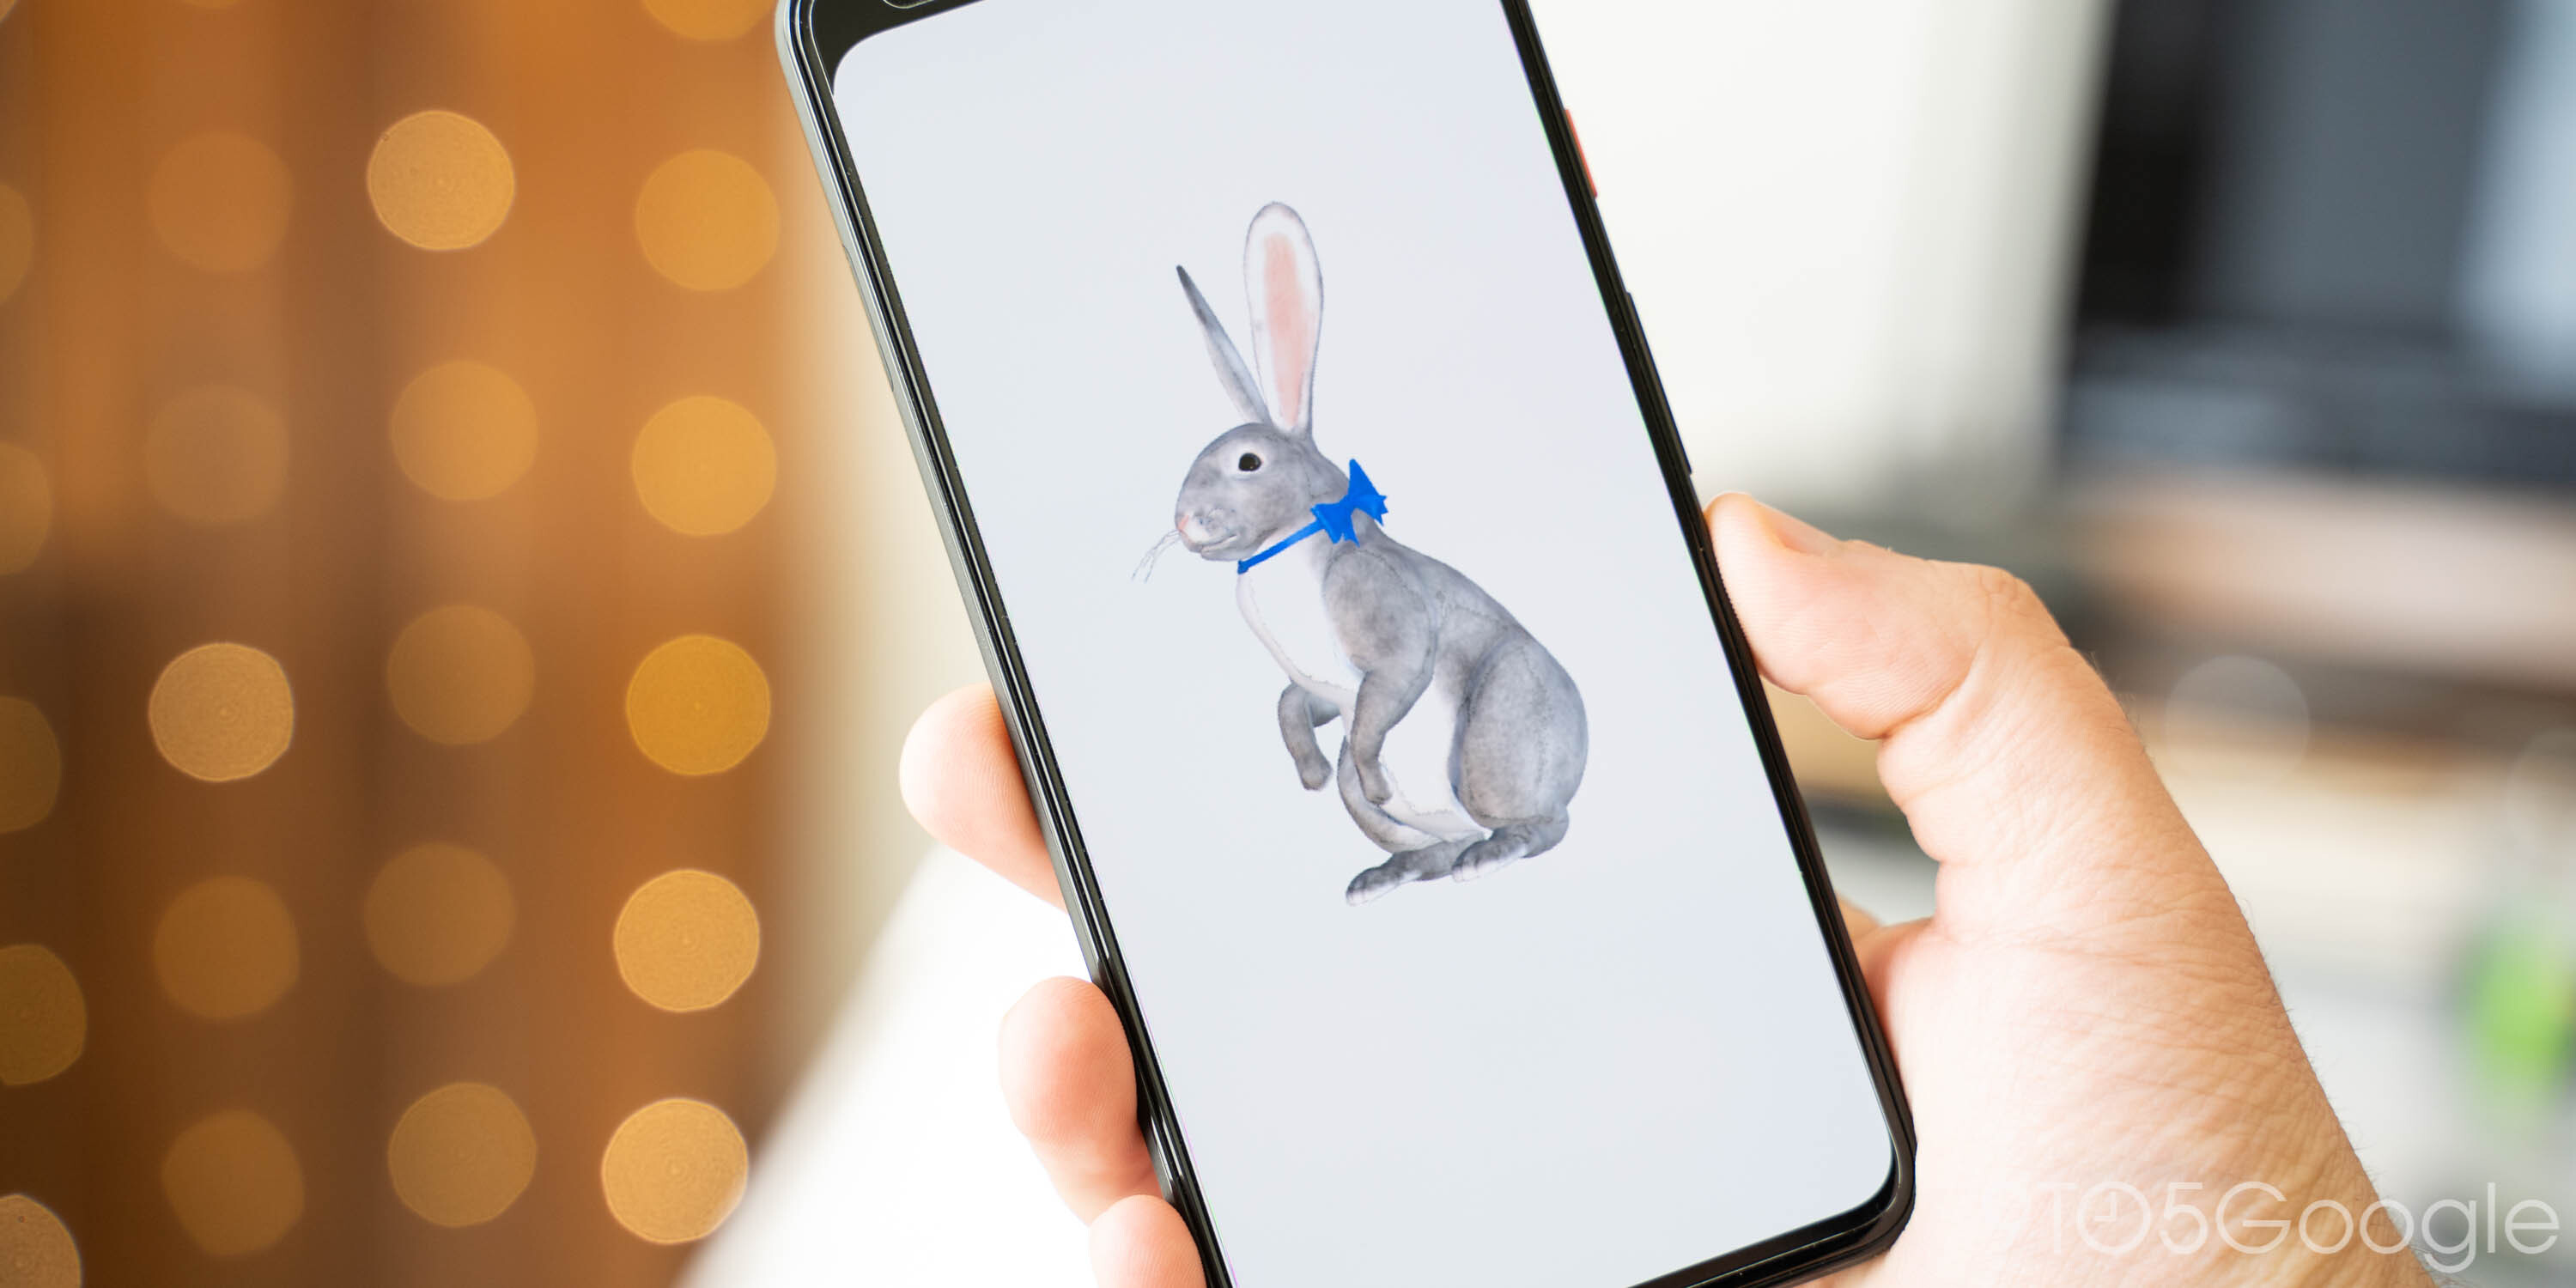 Google's next 3D animal is the Easter Bunny